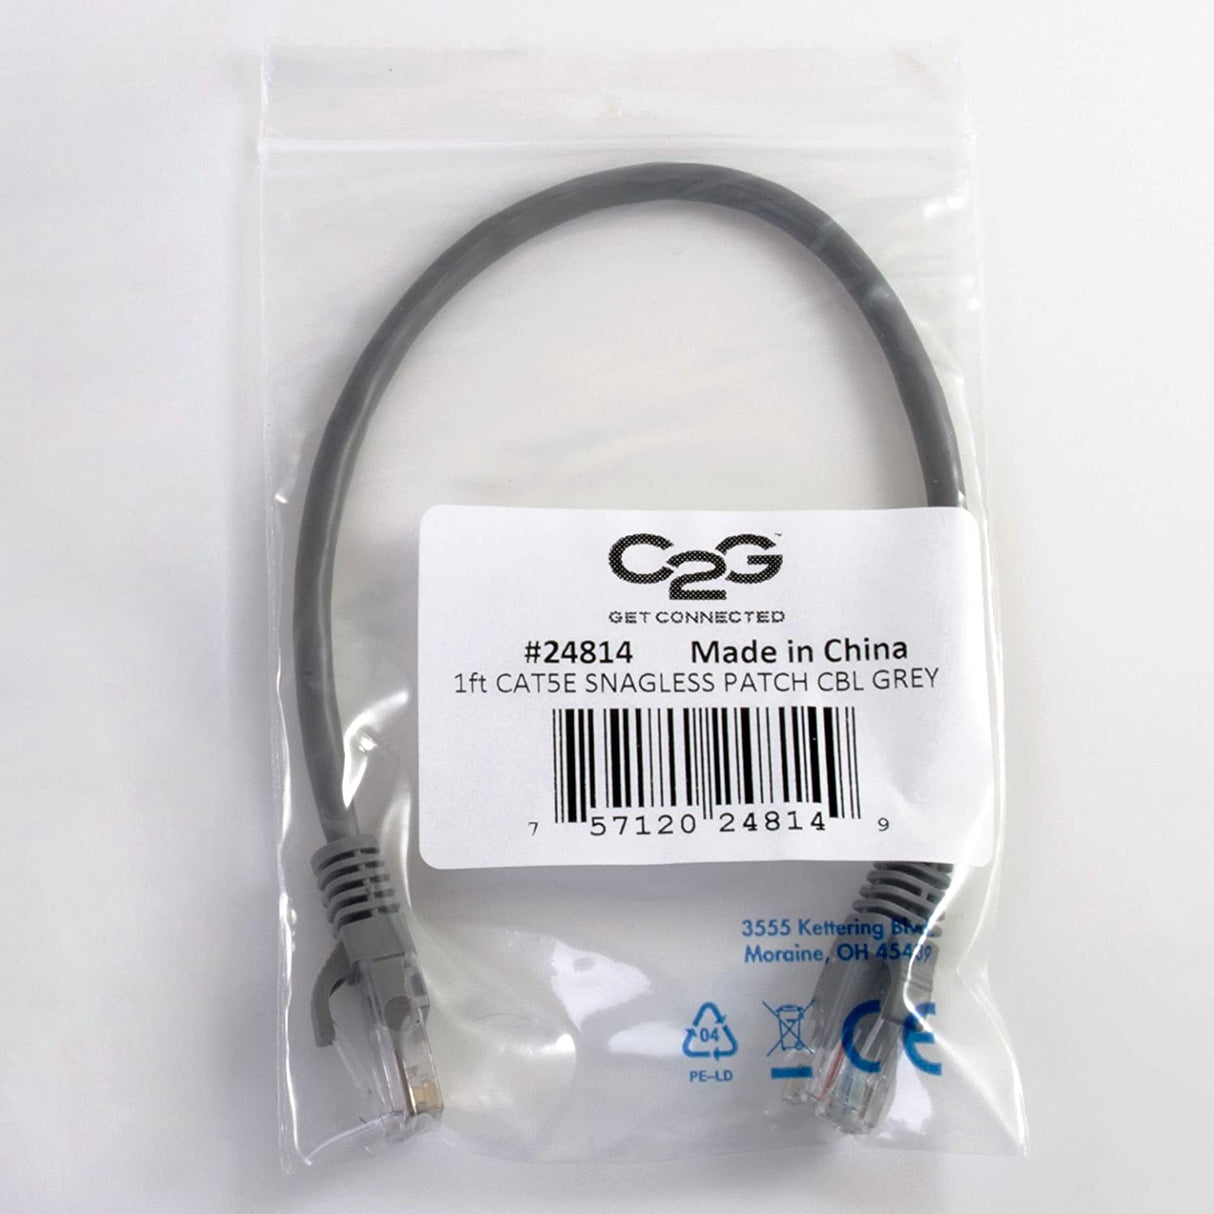 C2g/ cables to go Cables to Go 7ft Cat5e Snagless Patch CBL Grey